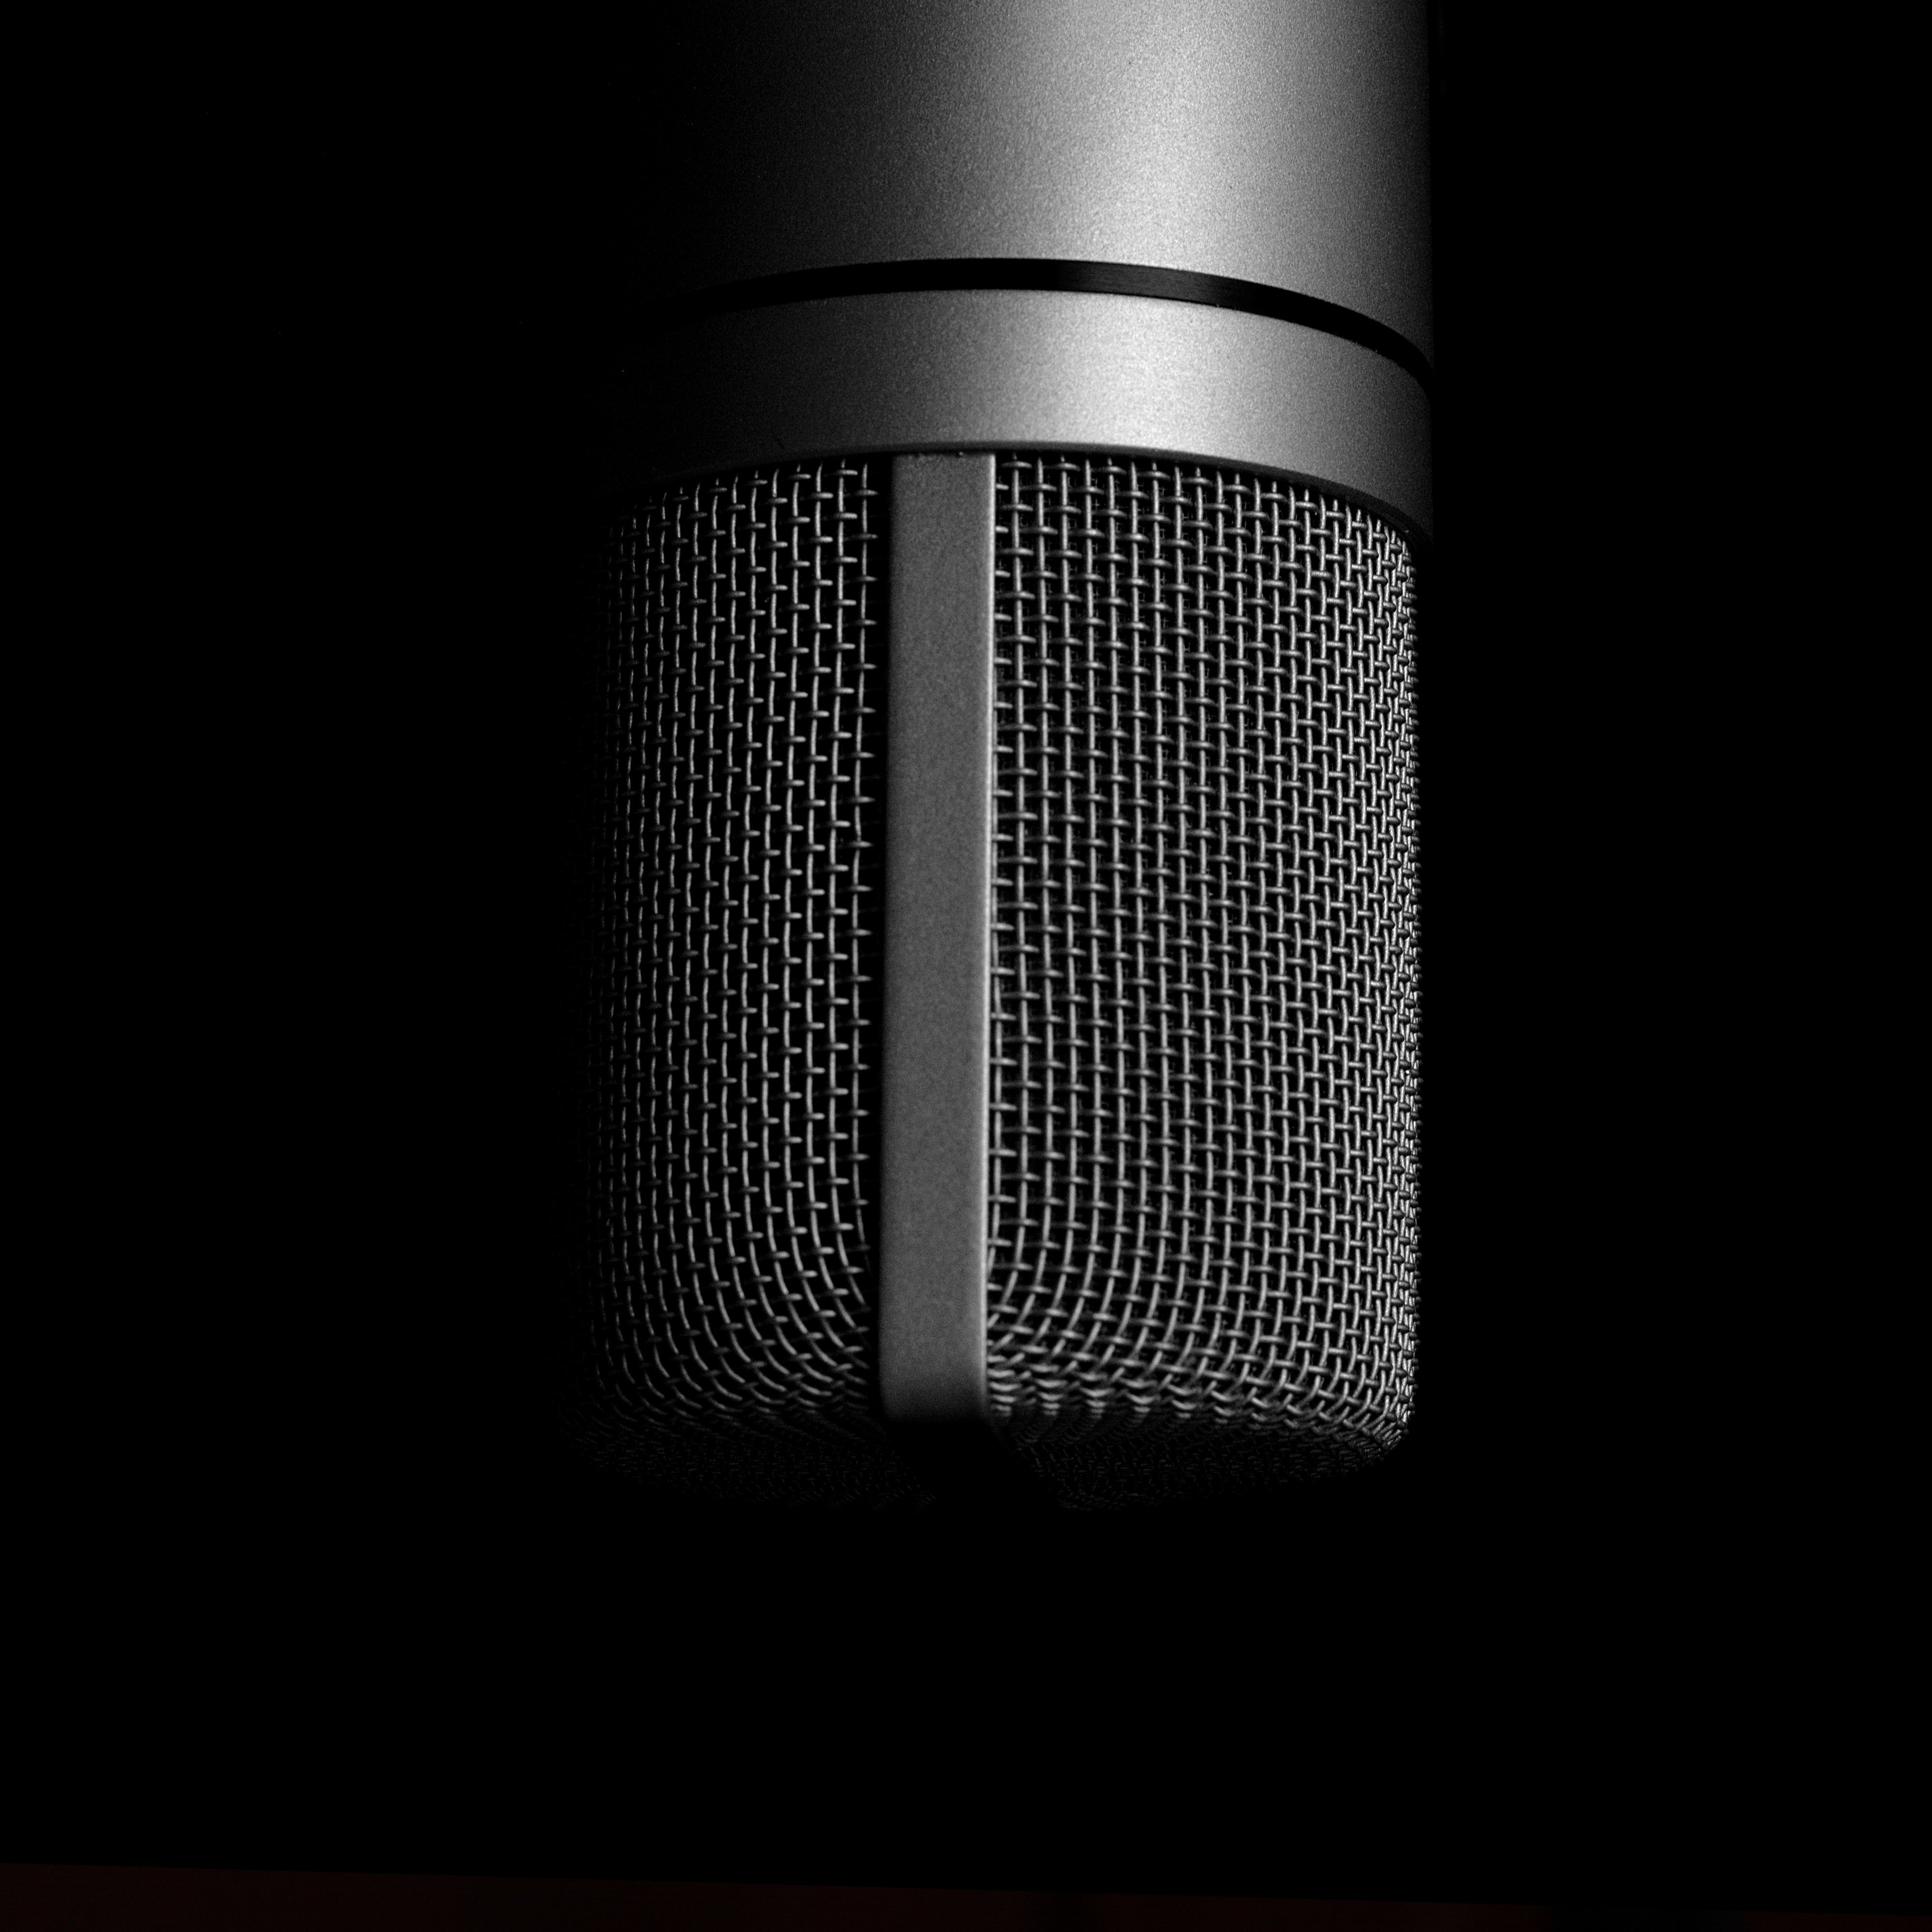 extreme close up of dark grey coloured Condenser Microphone against black background